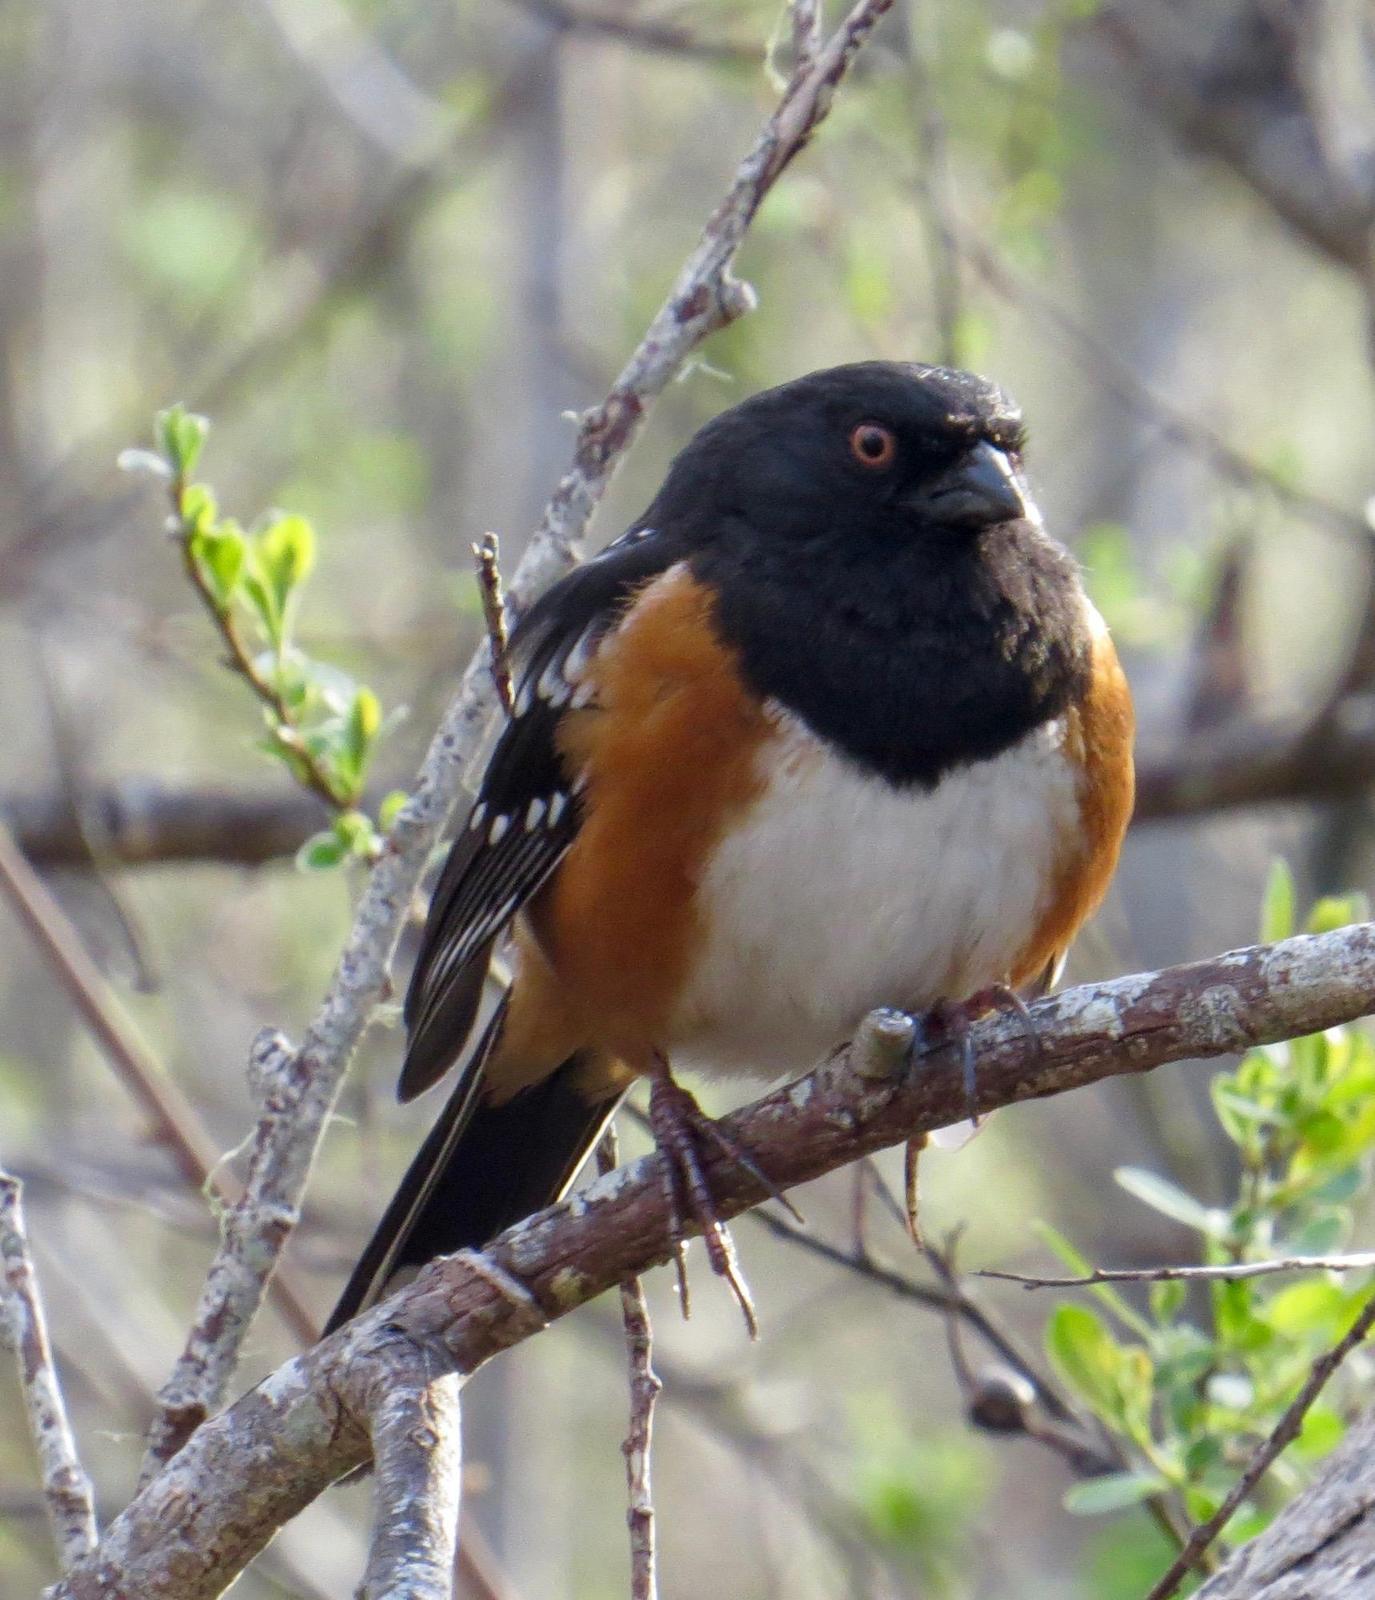 Spotted Towhee (oregonus Group) Photo by Don Glasco